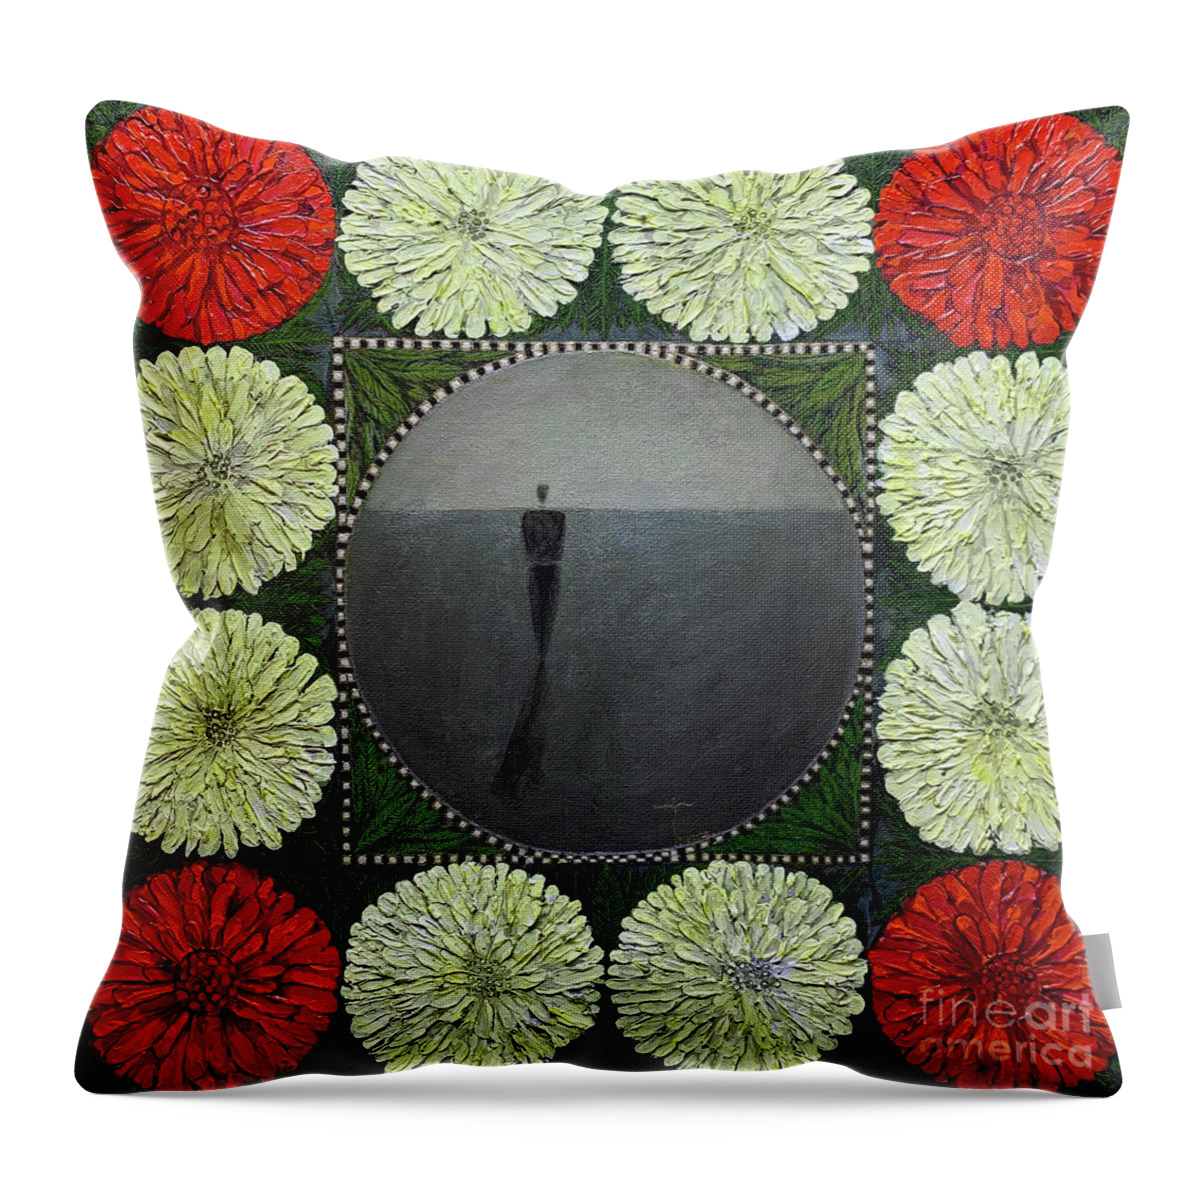  Throw Pillow featuring the painting Loneliness Of The Working Artist by James Lanigan Thompson MFA